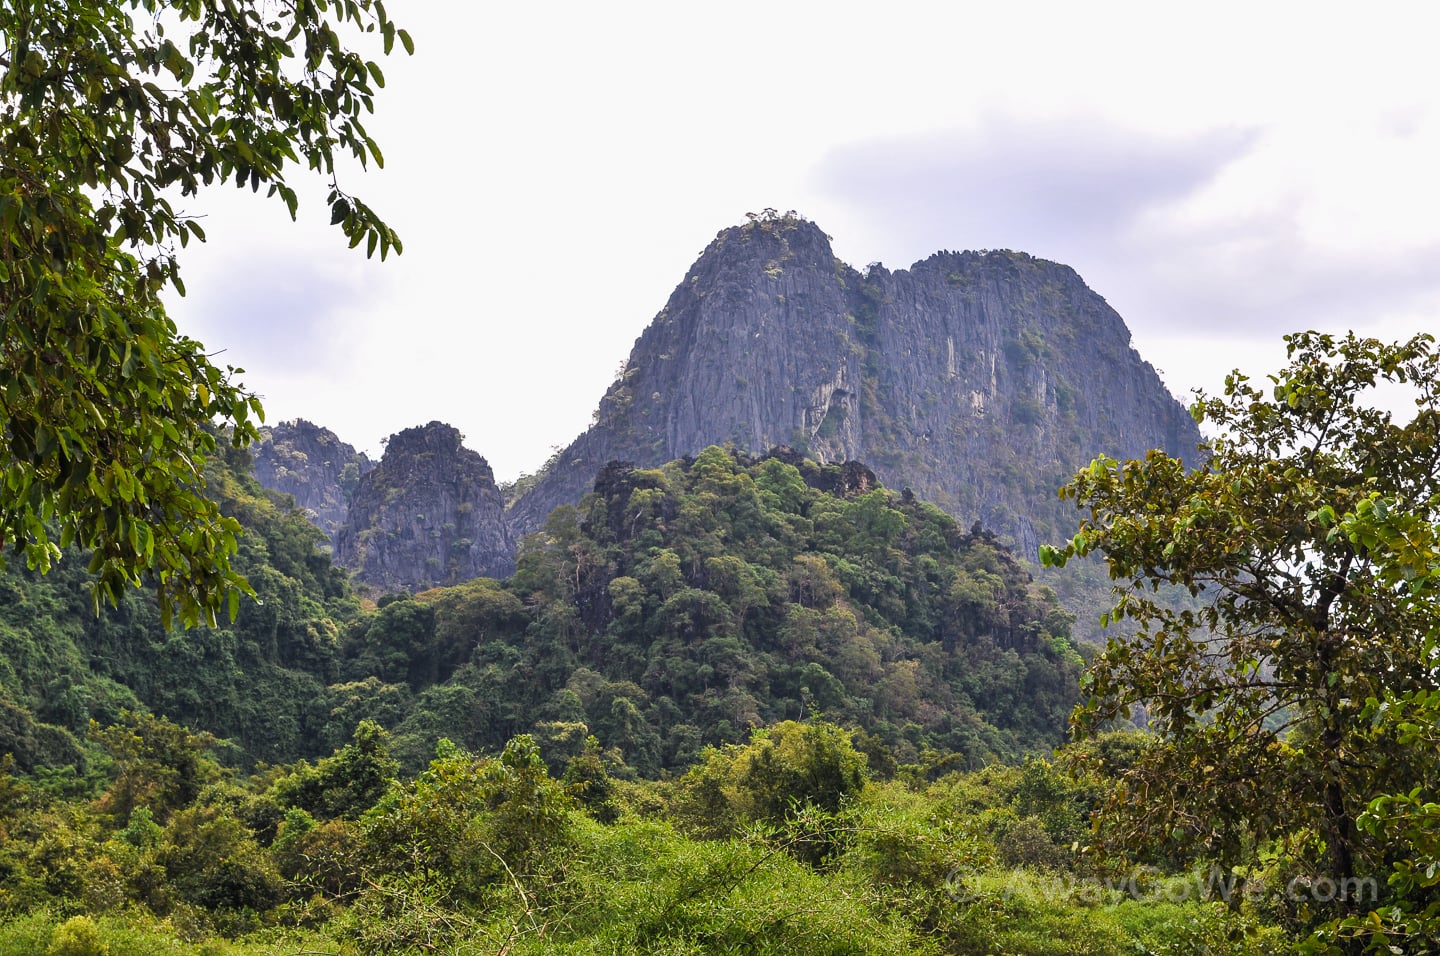 karst peeks surrounded by jungle near buddha cave in laos